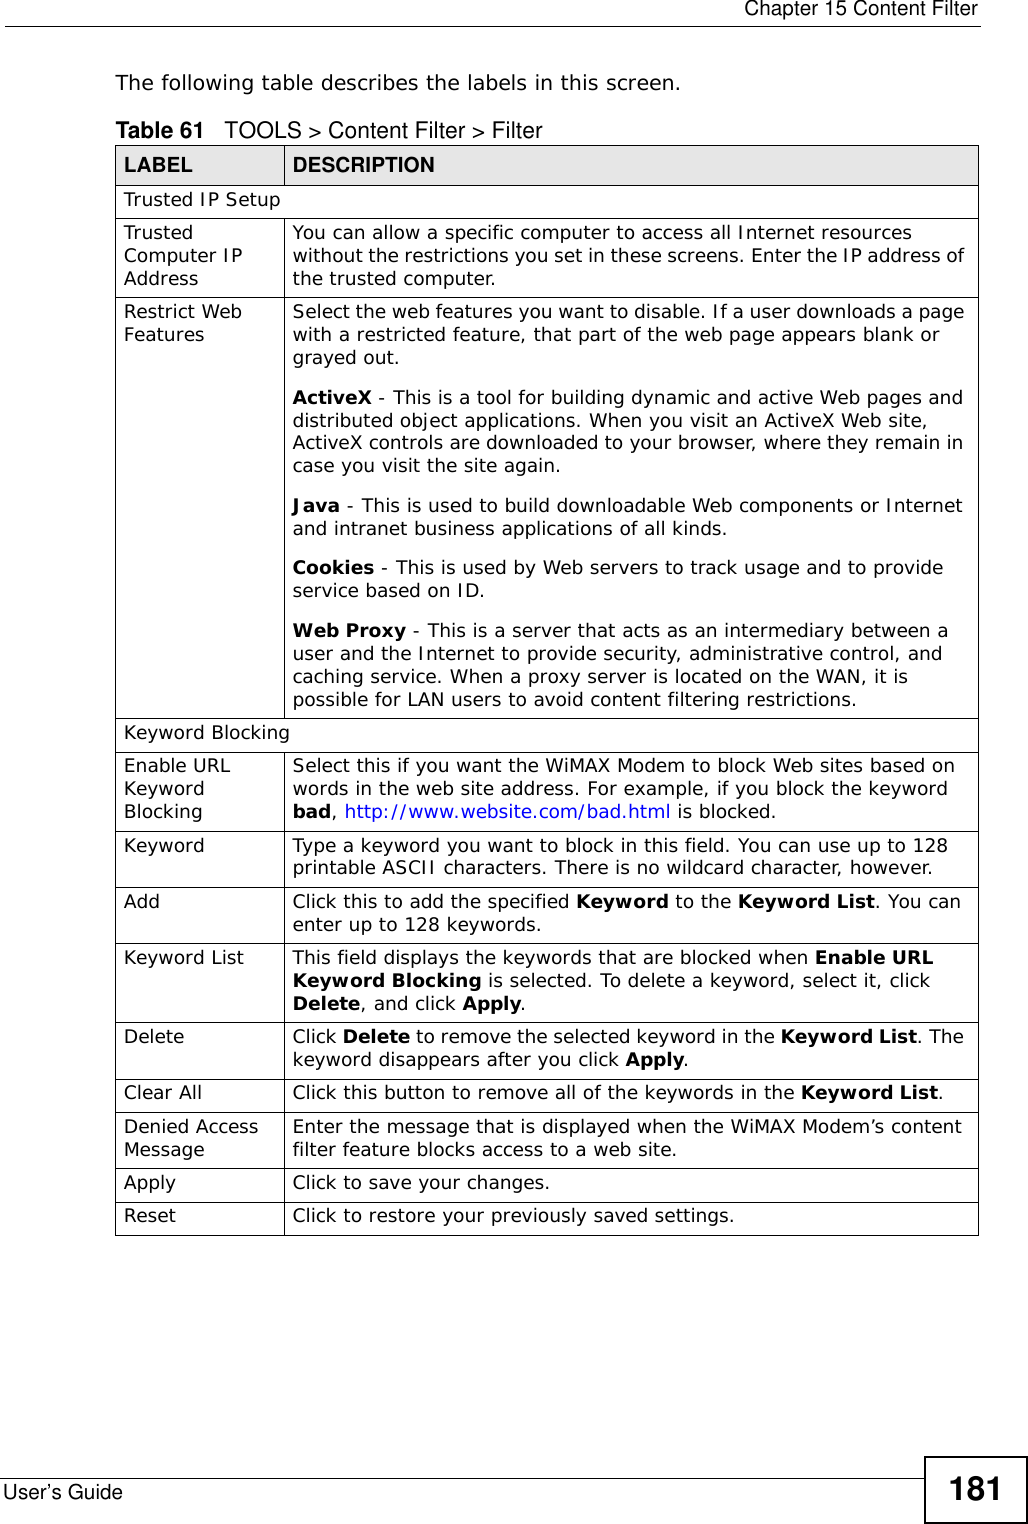  Chapter 15 Content FilterUser’s Guide 181The following table describes the labels in this screen.  Table 61   TOOLS &gt; Content Filter &gt; FilterLABEL DESCRIPTIONTrusted IP SetupTrusted Computer IP AddressYou can allow a specific computer to access all Internet resources without the restrictions you set in these screens. Enter the IP address of the trusted computer.Restrict Web Features Select the web features you want to disable. If a user downloads a page with a restricted feature, that part of the web page appears blank or grayed out.ActiveX - This is a tool for building dynamic and active Web pages and distributed object applications. When you visit an ActiveX Web site, ActiveX controls are downloaded to your browser, where they remain in case you visit the site again.Java - This is used to build downloadable Web components or Internet and intranet business applications of all kinds.Cookies - This is used by Web servers to track usage and to provide service based on ID.Web Proxy - This is a server that acts as an intermediary between a user and the Internet to provide security, administrative control, and caching service. When a proxy server is located on the WAN, it is possible for LAN users to avoid content filtering restrictions.Keyword BlockingEnable URL Keyword BlockingSelect this if you want the WiMAX Modem to block Web sites based on words in the web site address. For example, if you block the keyword bad, http://www.website.com/bad.html is blocked.Keyword Type a keyword you want to block in this field. You can use up to 128 printable ASCII characters. There is no wildcard character, however.Add Click this to add the specified Keyword to the Keyword List. You can enter up to 128 keywords.Keyword List This field displays the keywords that are blocked when Enable URL Keyword Blocking is selected. To delete a keyword, select it, click Delete, and click Apply.Delete Click Delete to remove the selected keyword in the Keyword List. The keyword disappears after you click Apply.Clear All Click this button to remove all of the keywords in the Keyword List.Denied Access Message Enter the message that is displayed when the WiMAX Modem’s content filter feature blocks access to a web site.Apply Click to save your changes.Reset Click to restore your previously saved settings.